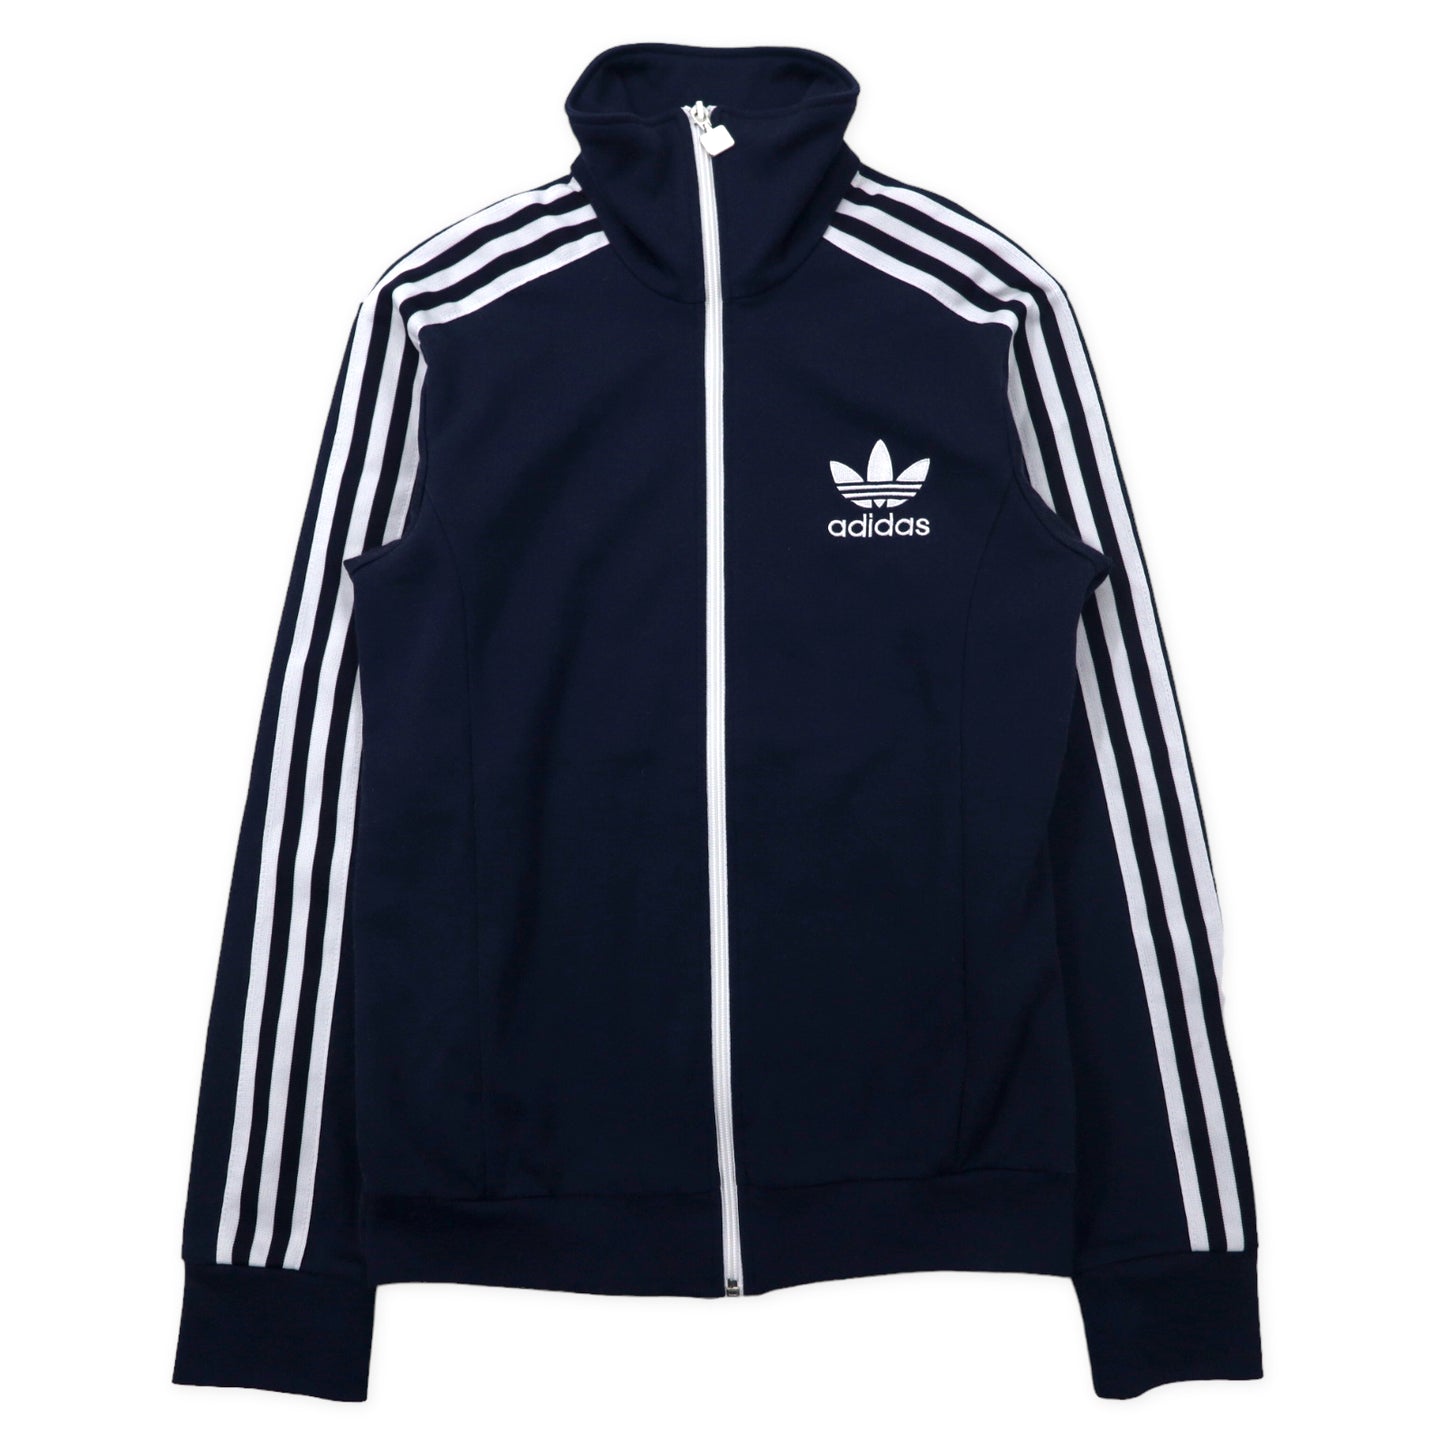 Adidas Originals Track Jacket High Neck Jersey S Navy 3 STRIPED Trefile  Logo Embroidery EUROPA TRACK TOP